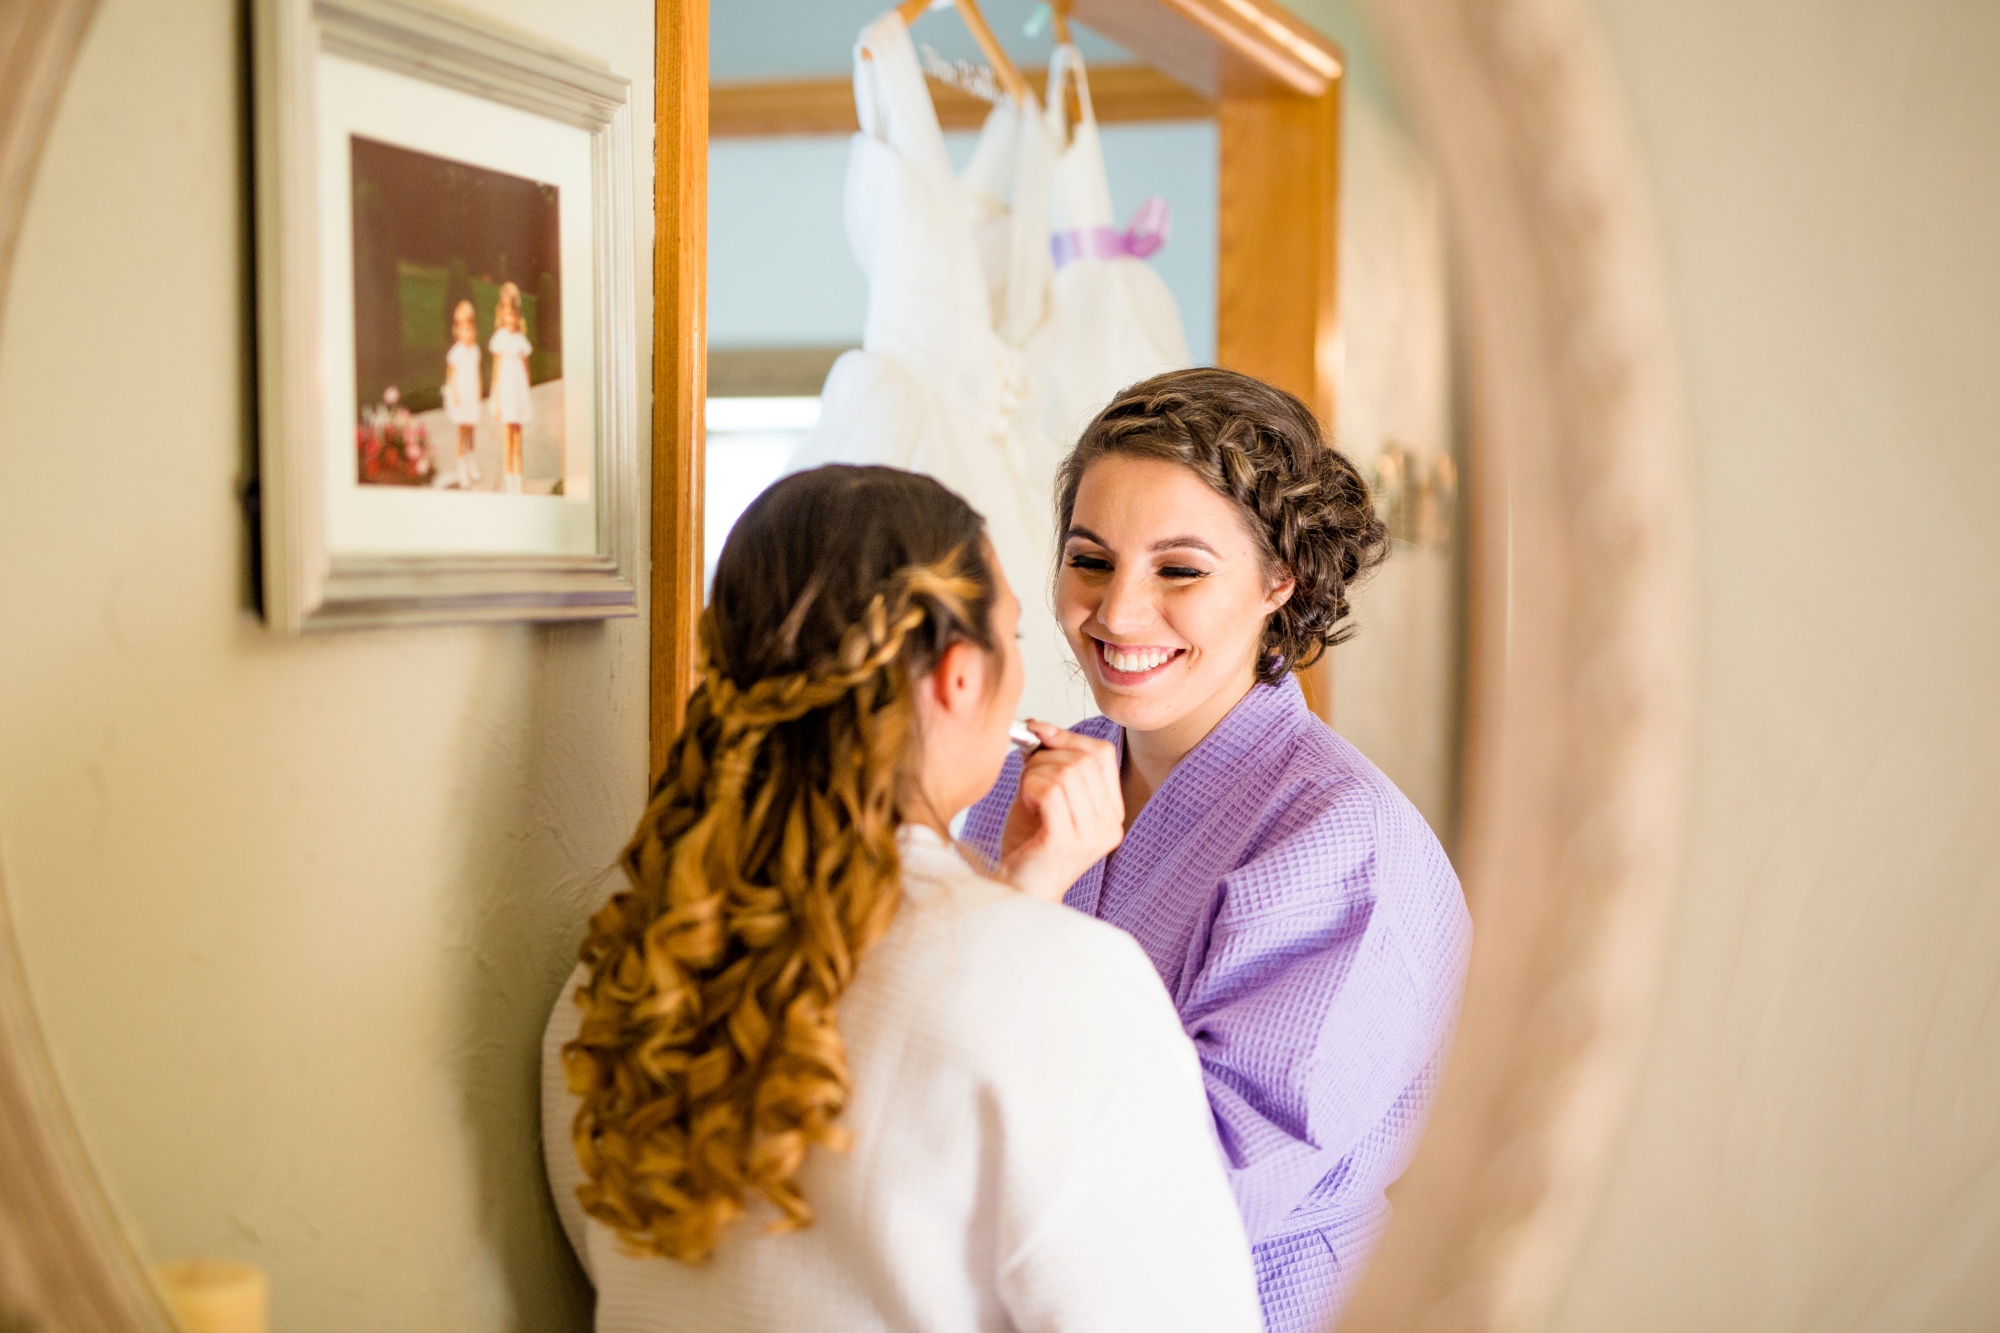 pittsburgh marriott north wedding pictures, cranberry township wedding venues, pittsburgh wedding photographer, monroeville wedding photographer, cranberry township wedding pictures